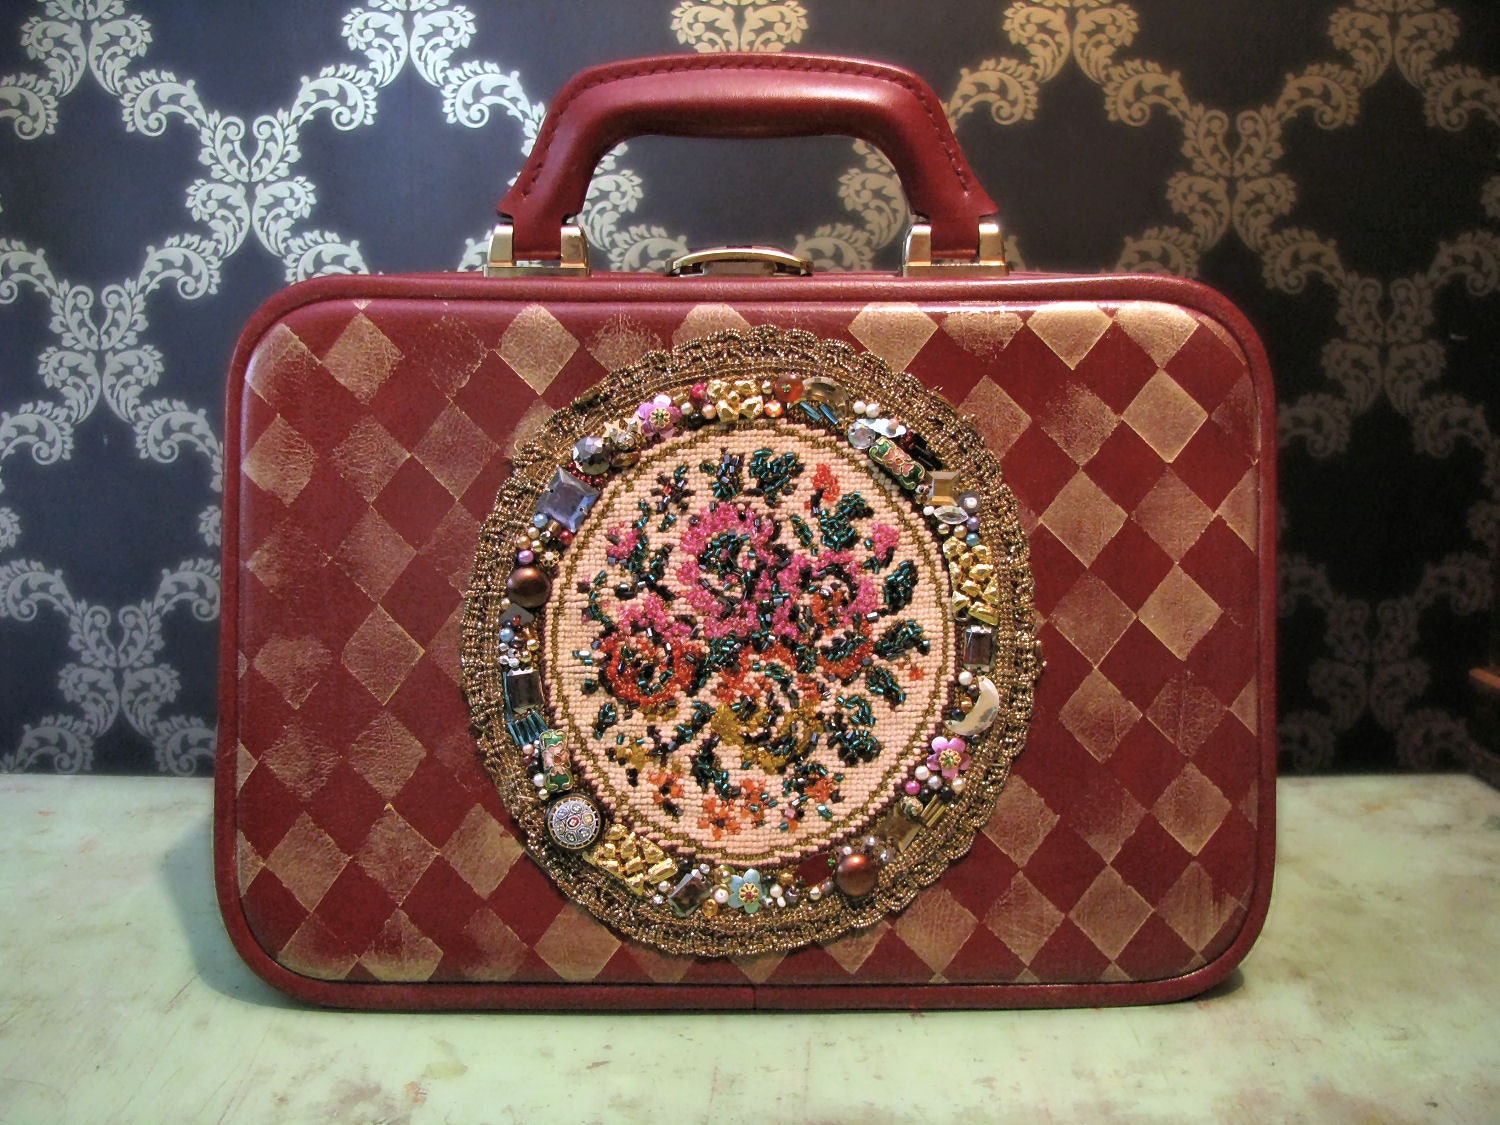 Vintage Beauty Case Baroque Tapestry Travel Bag by yasminbochi